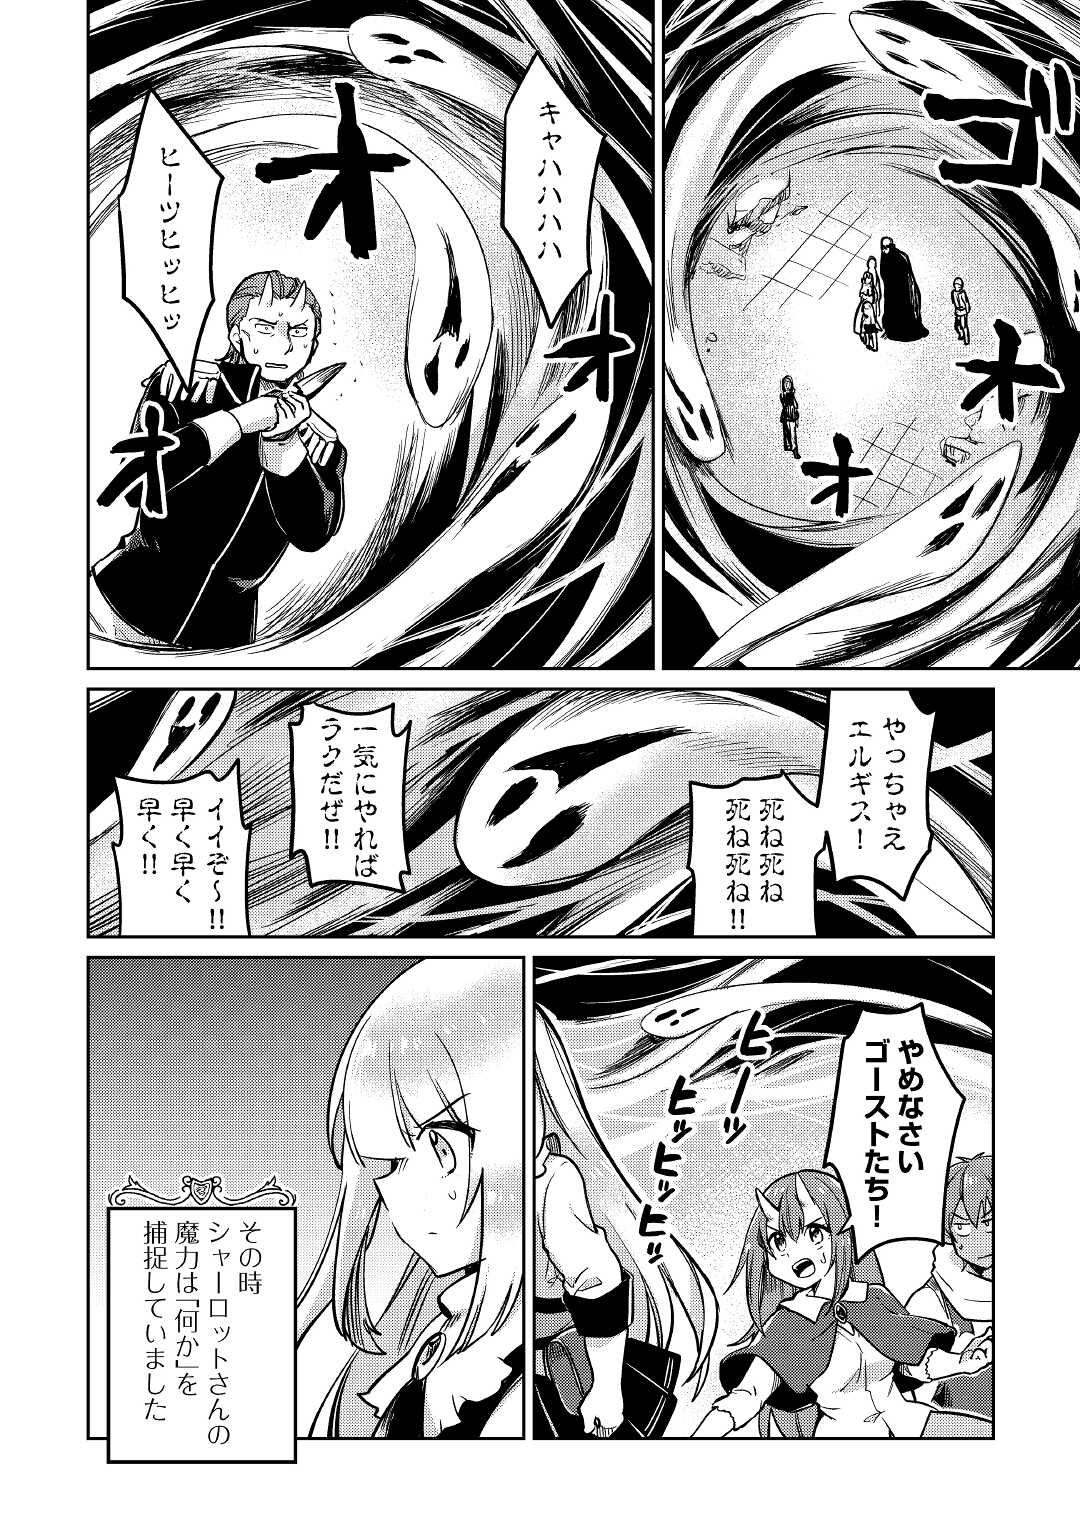 The Former Structural Researcher’s Story of Otherworldly Adventure 第40話 - Page 4